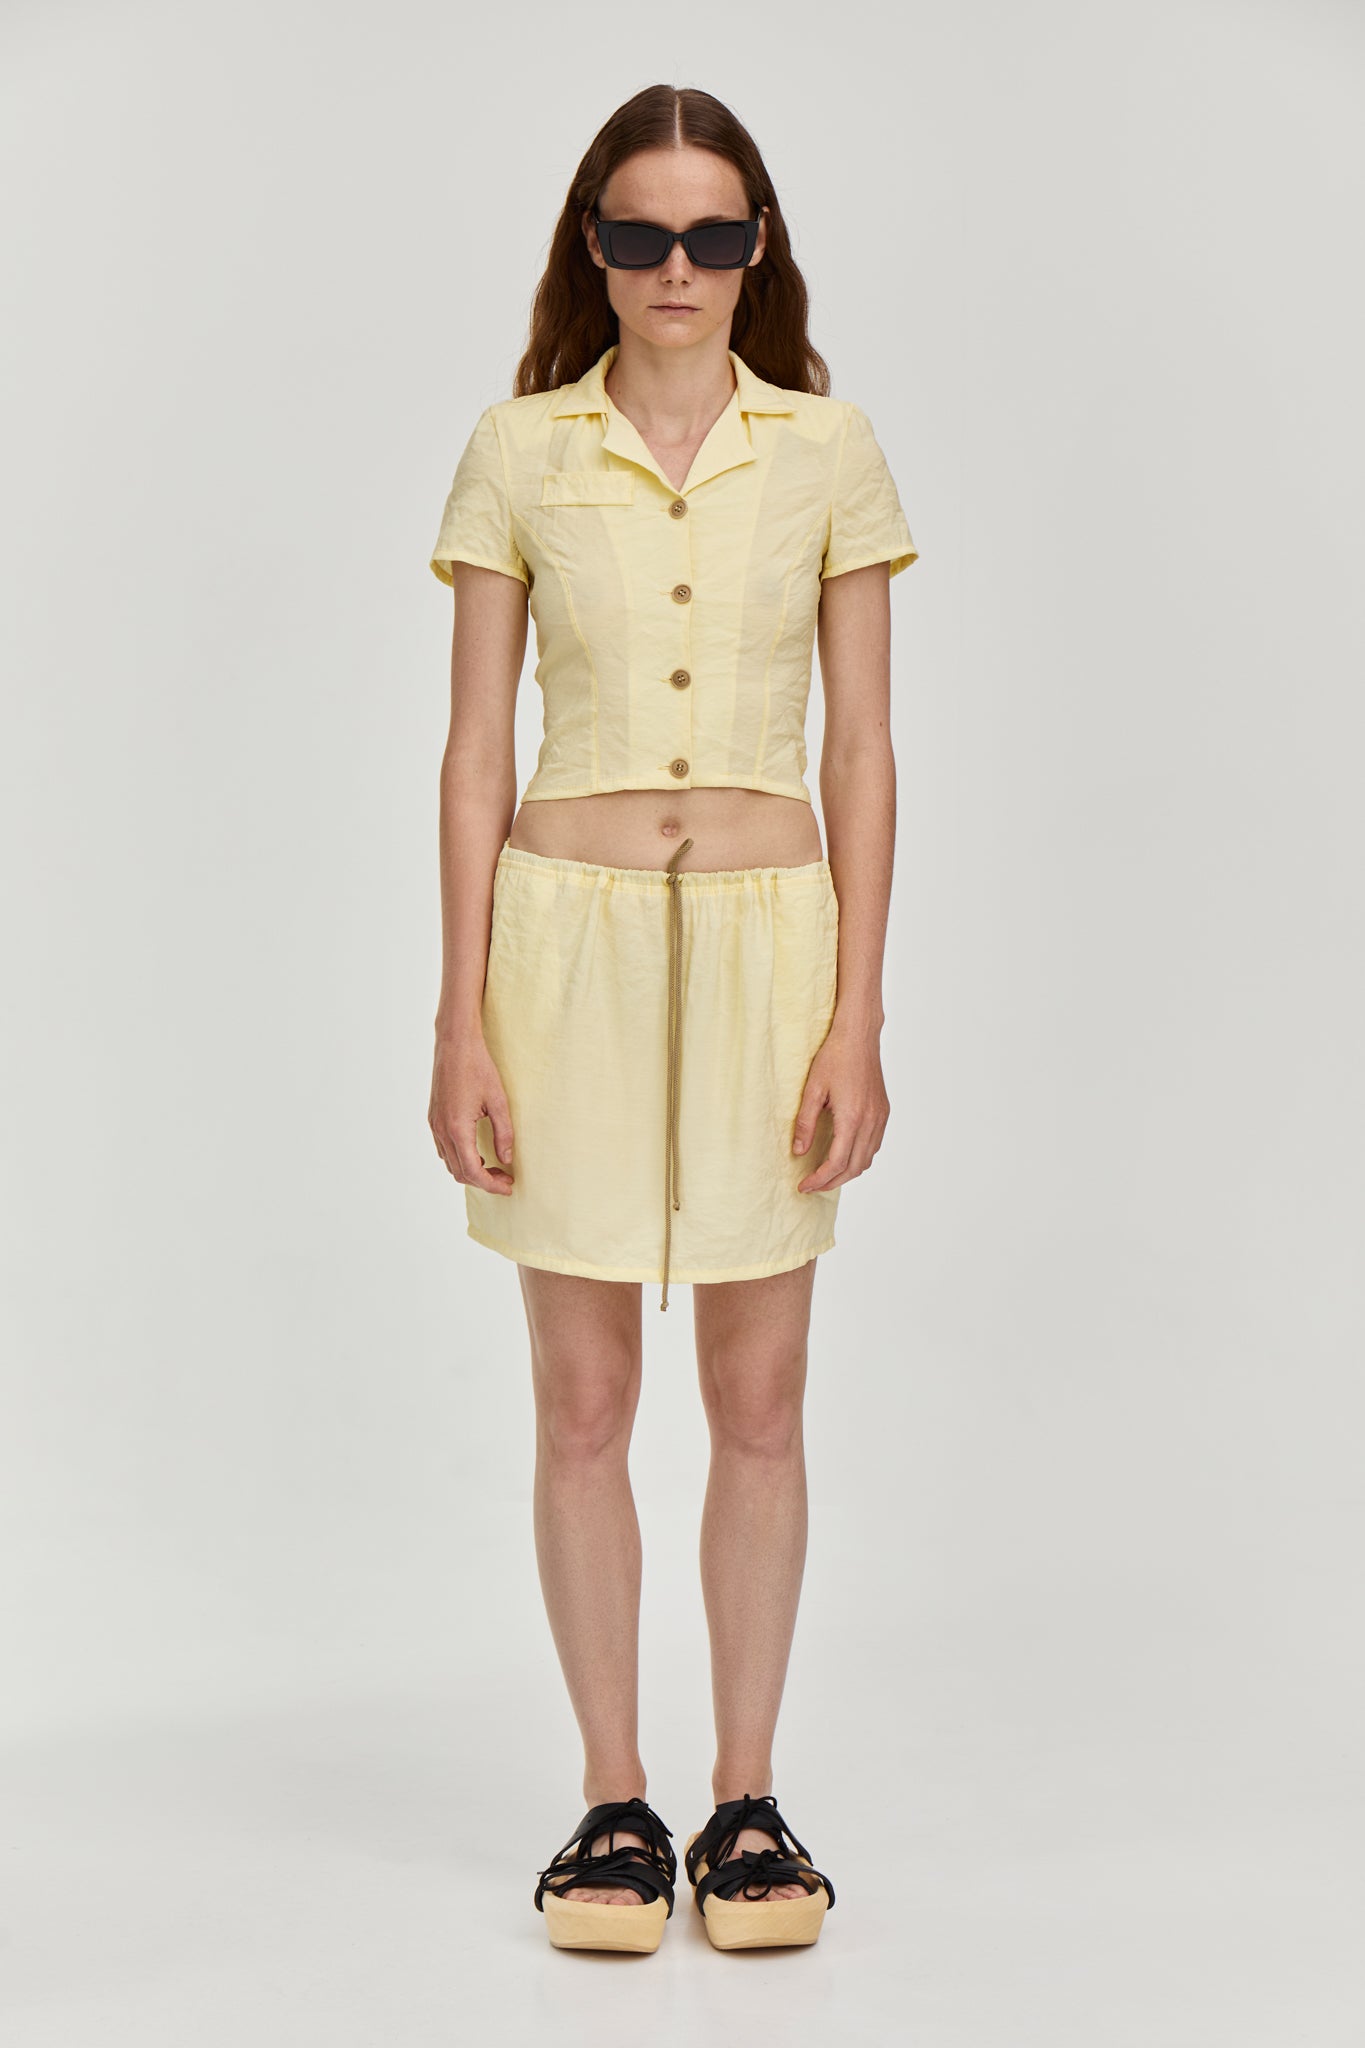 Lapel collar cropped blazer jacket with short sleeves from FORMA brand